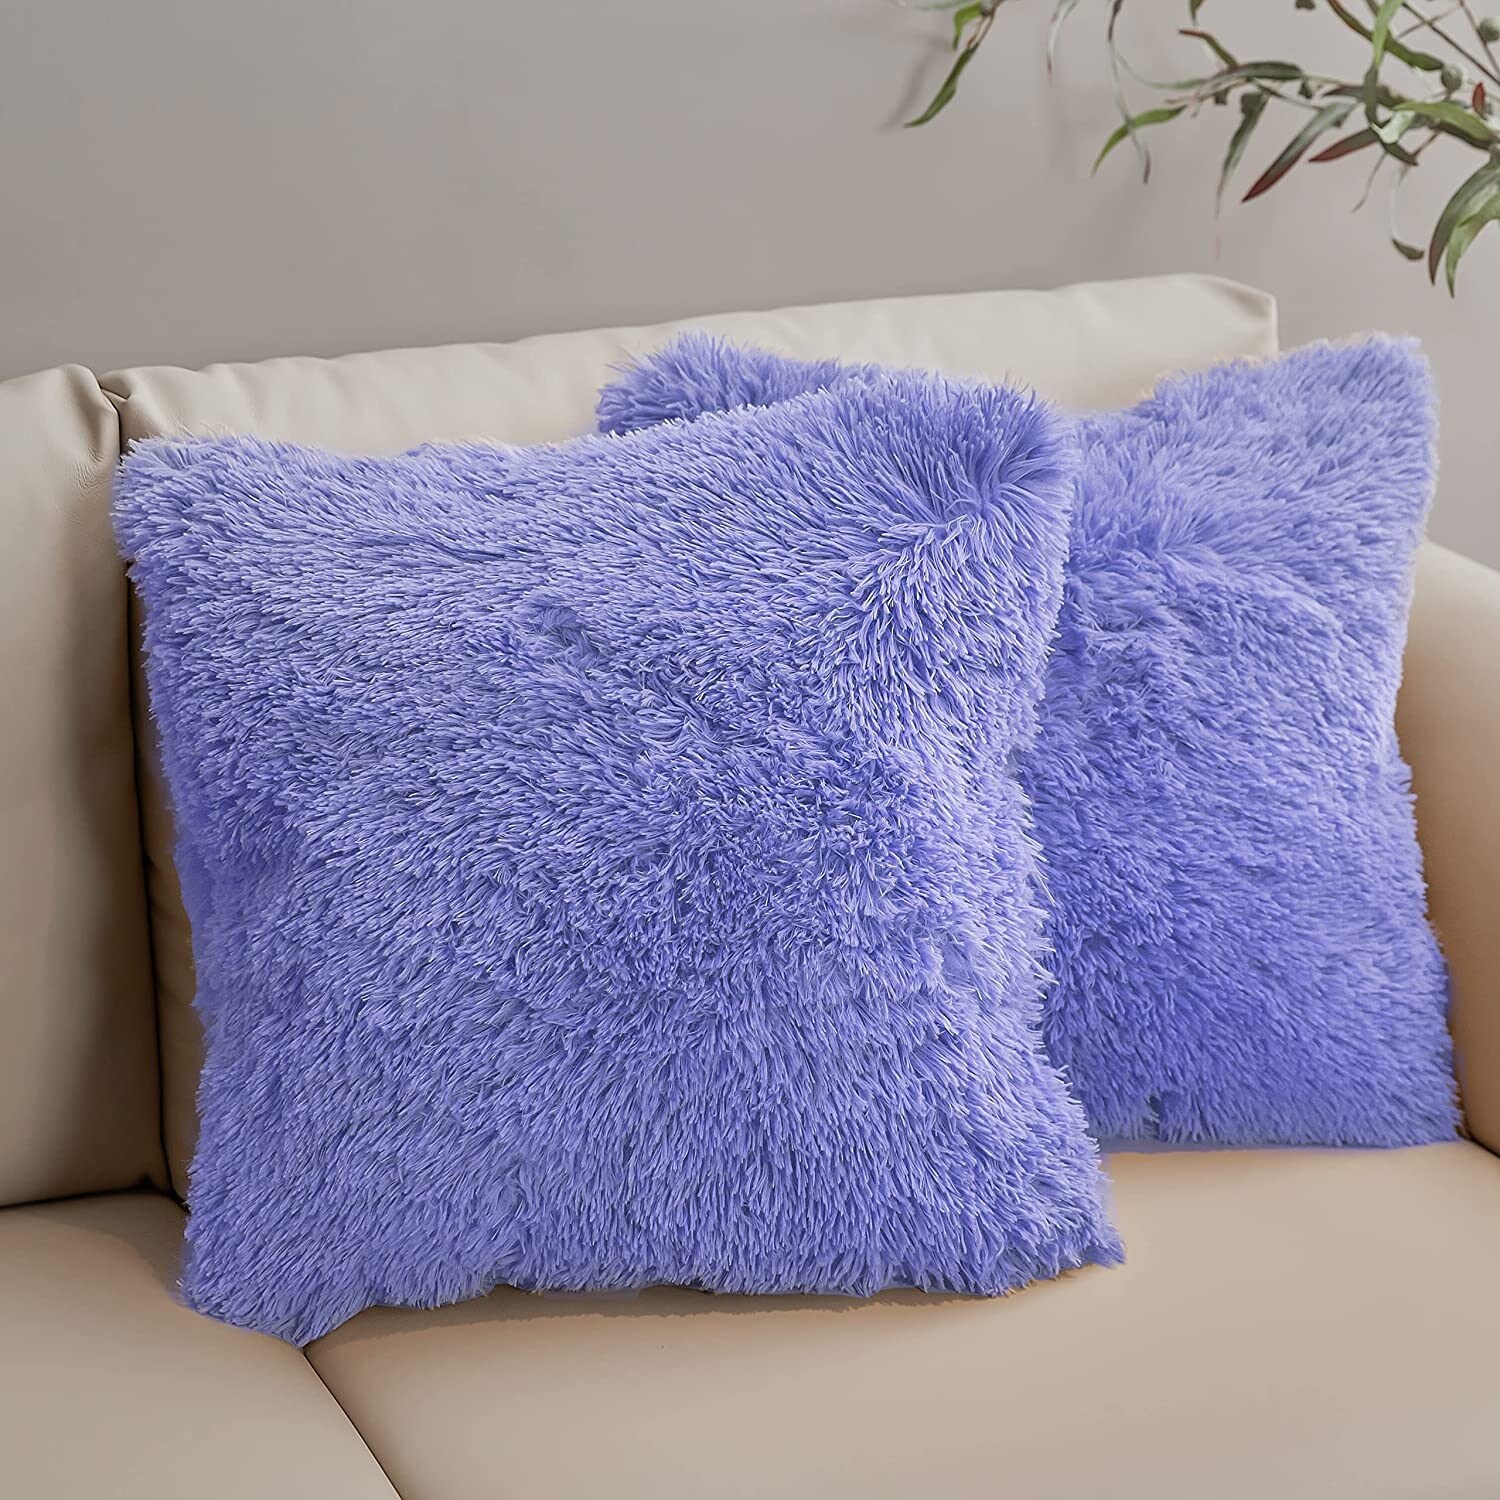 Cheer Collection Faux Fur Throw Pillows - Set of 2 Decorative